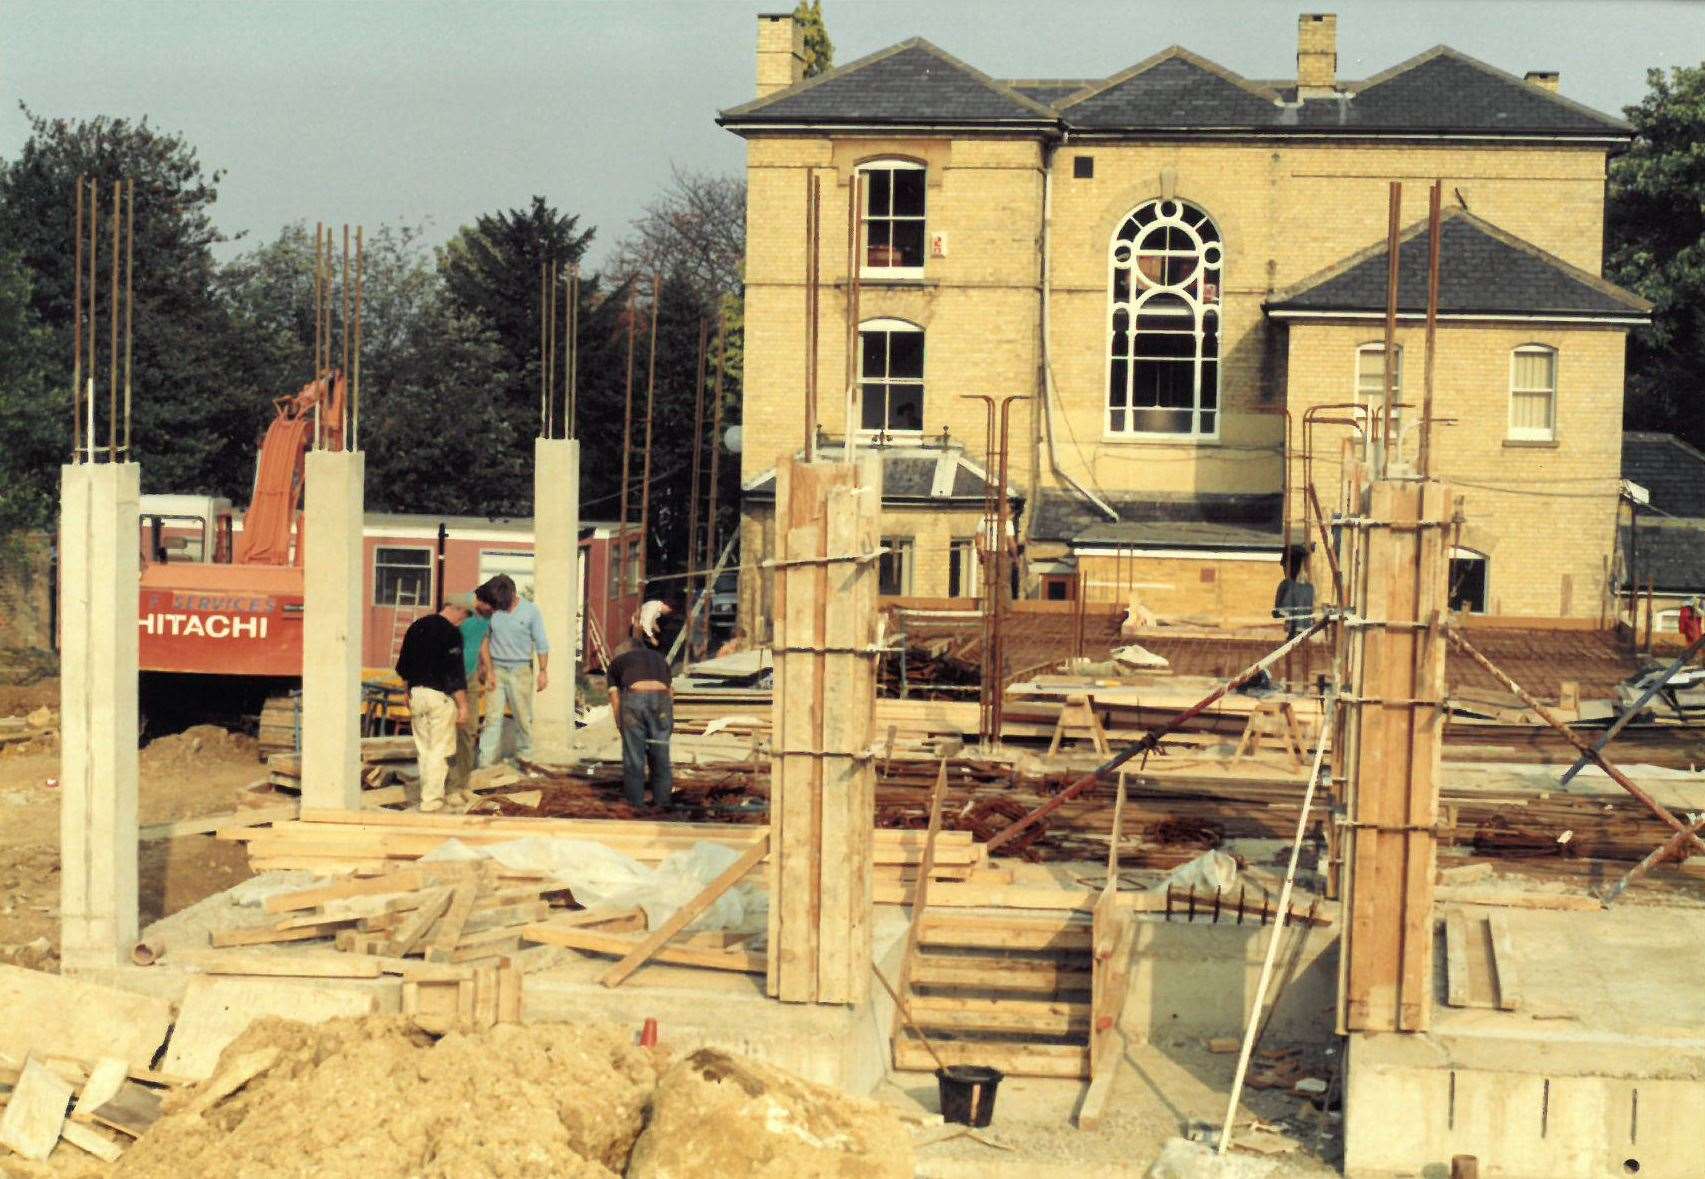 Renovation works at Somerfield House in 1990